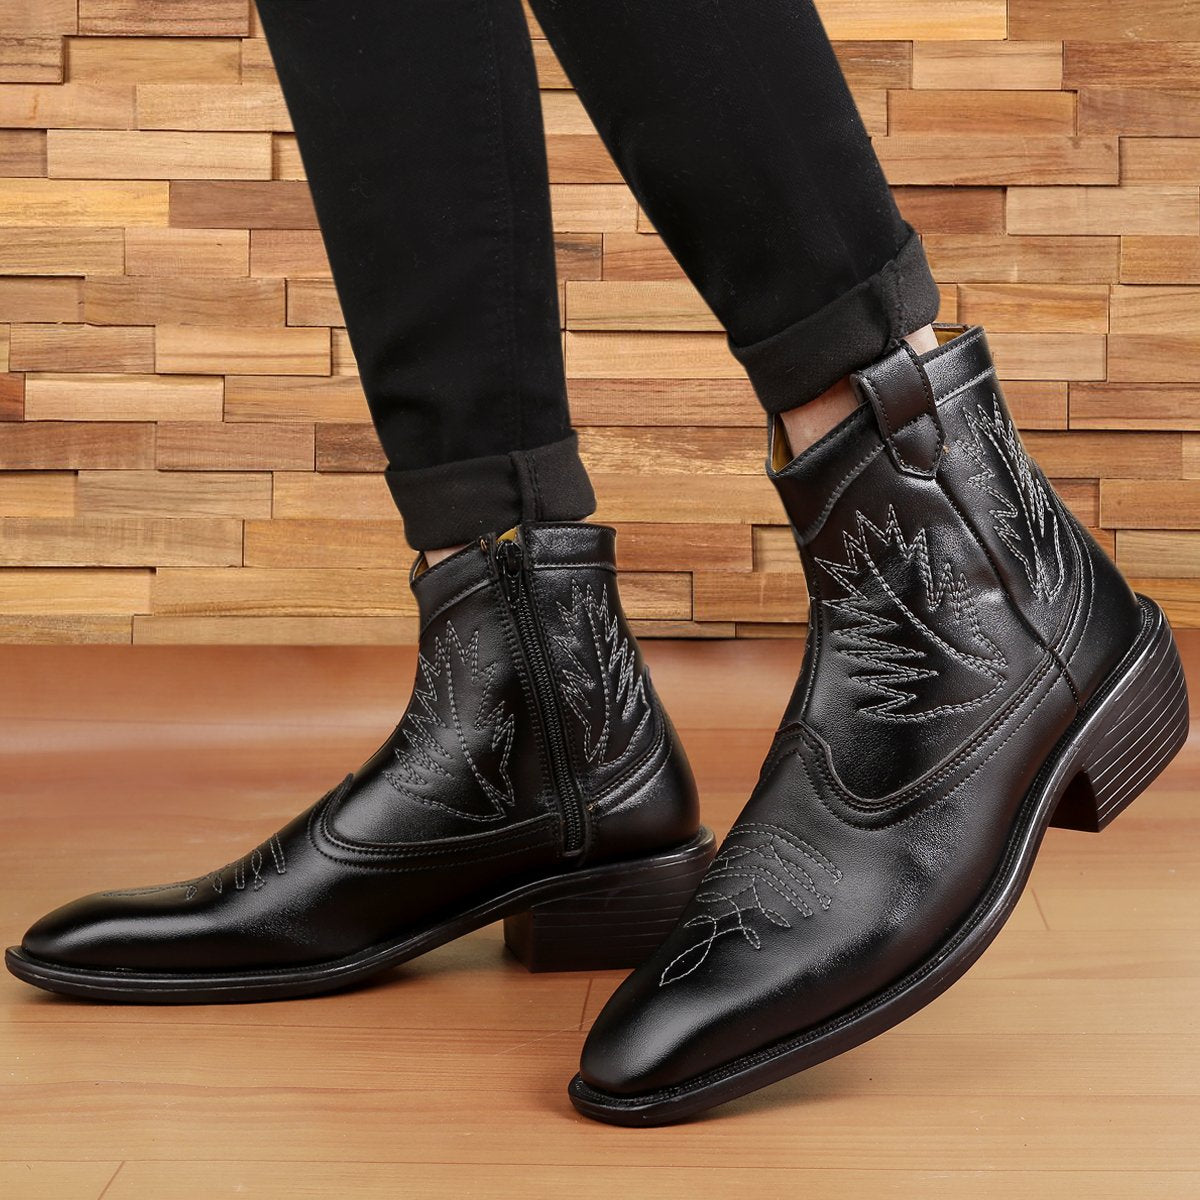 Buy New Men's Formal and Casual Retro Black Boots for all seasons